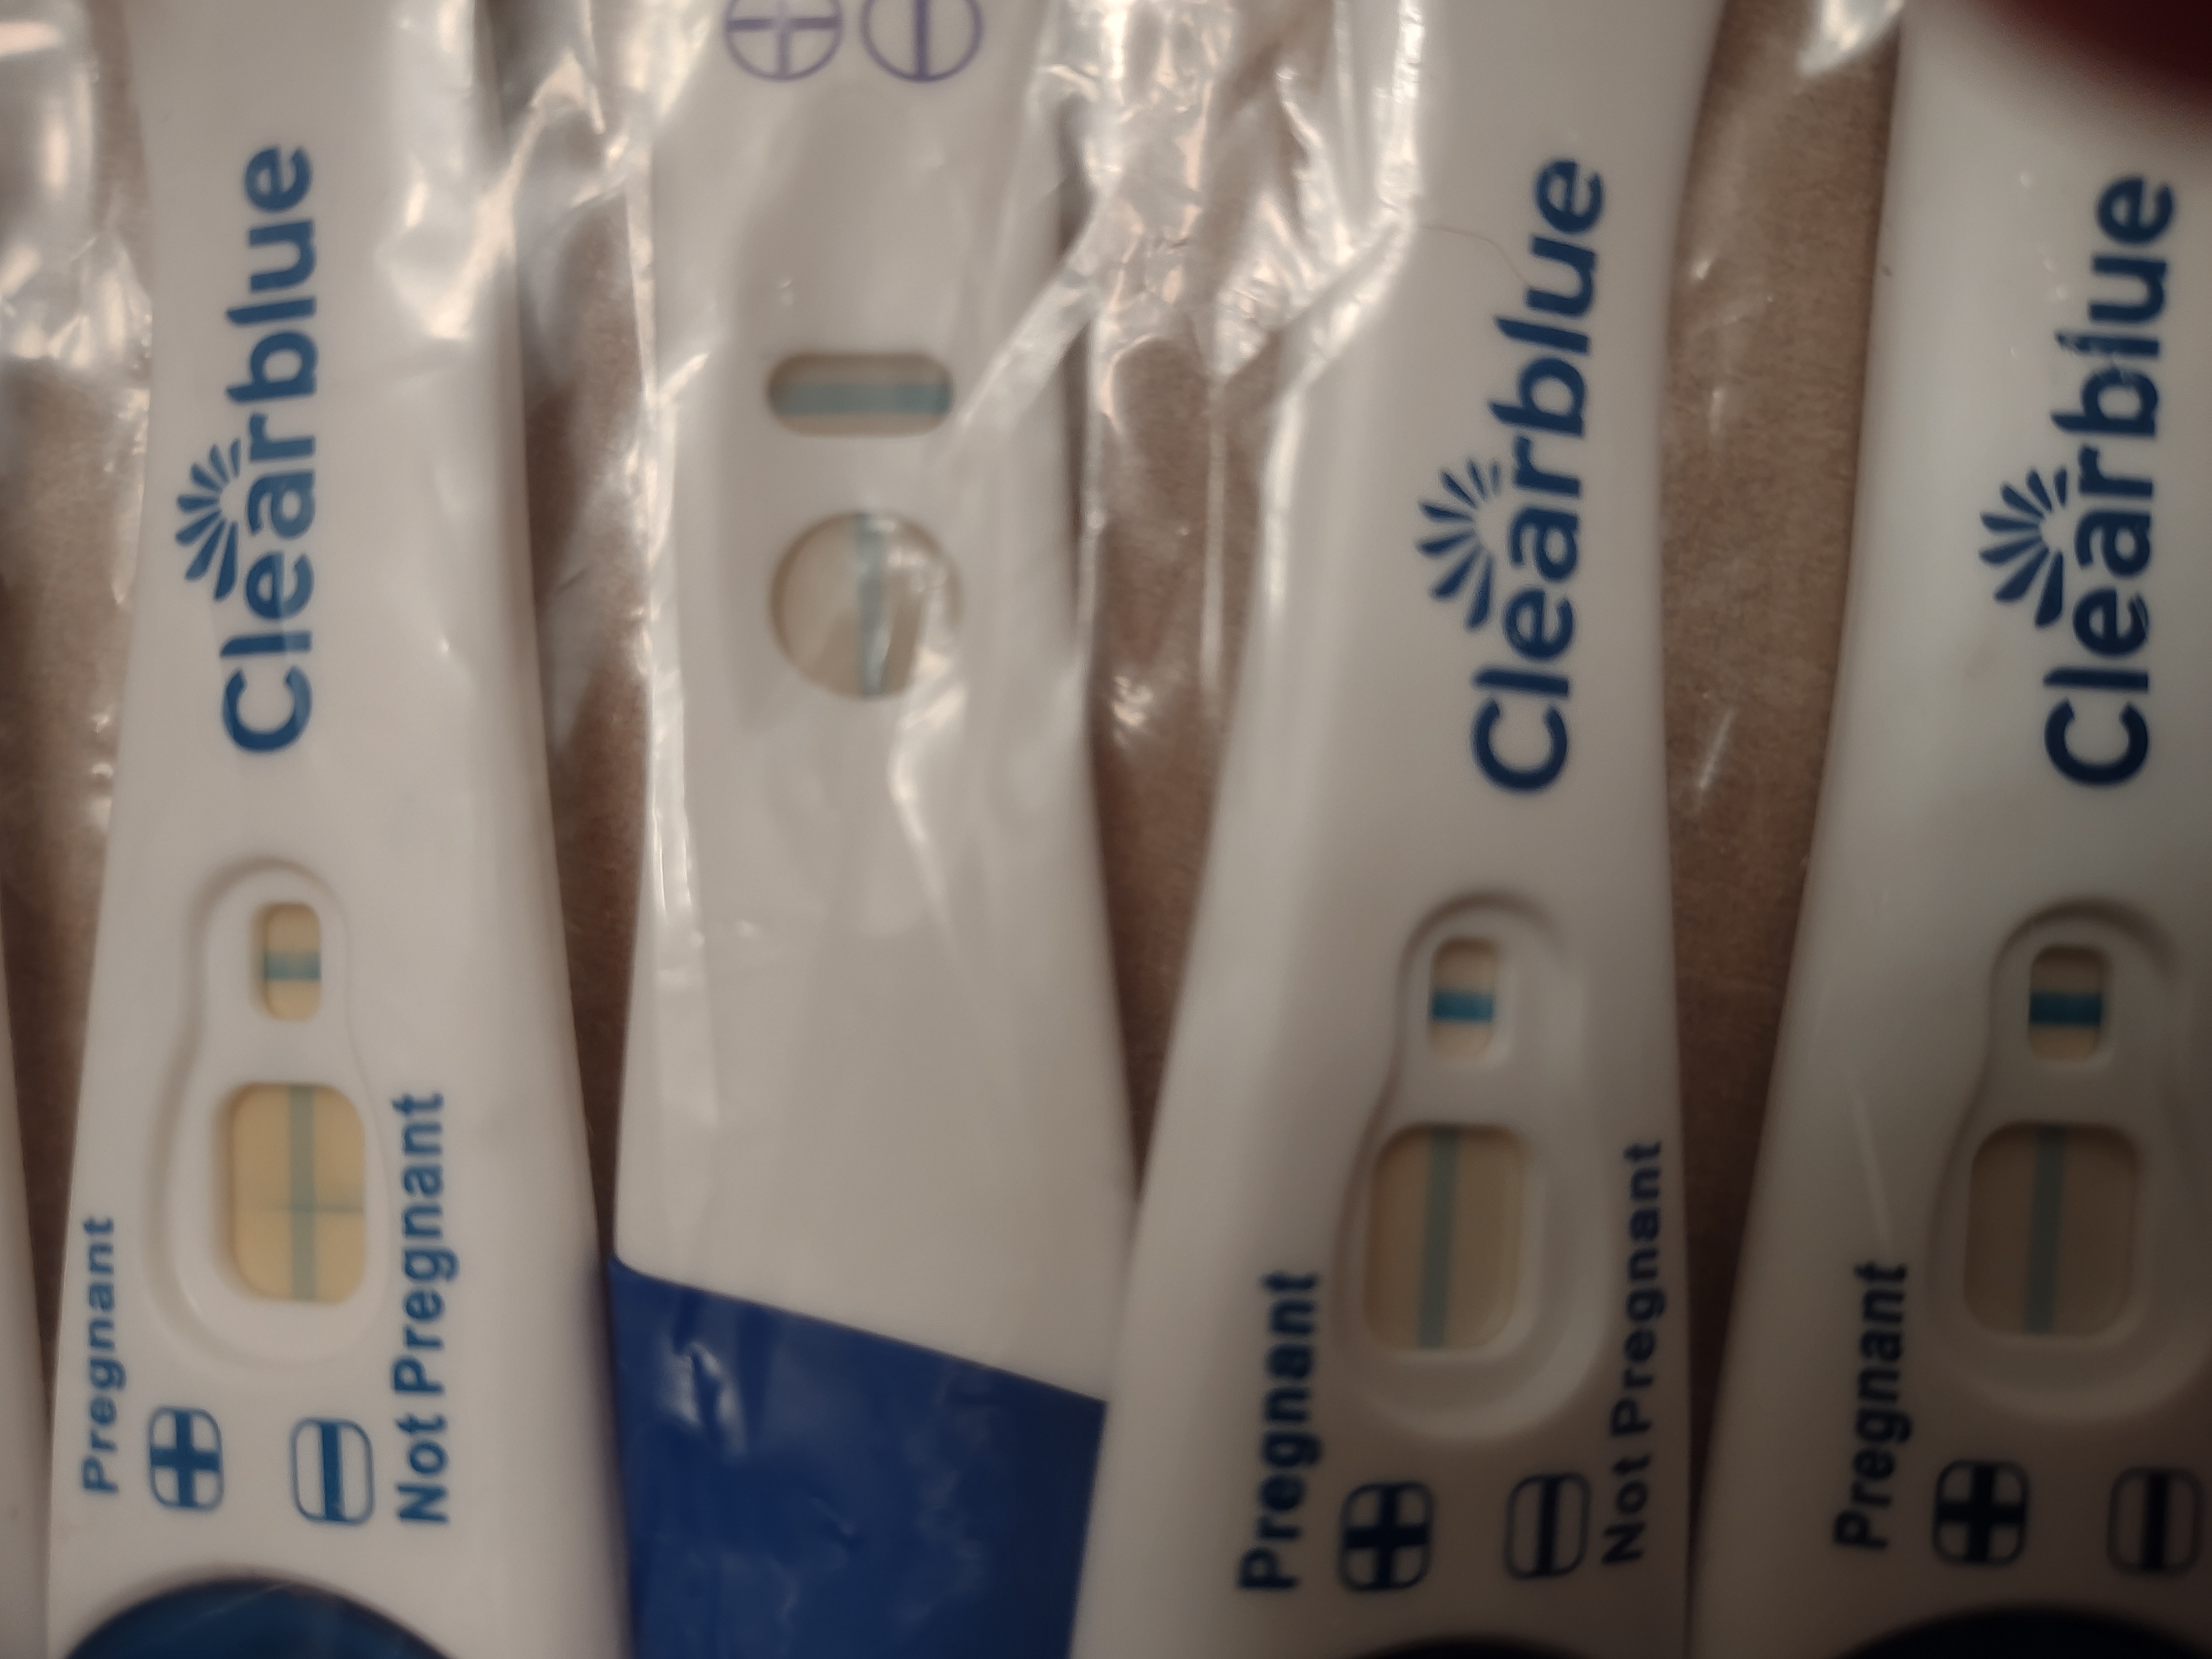 Help 45 days late mixed pregnancy test